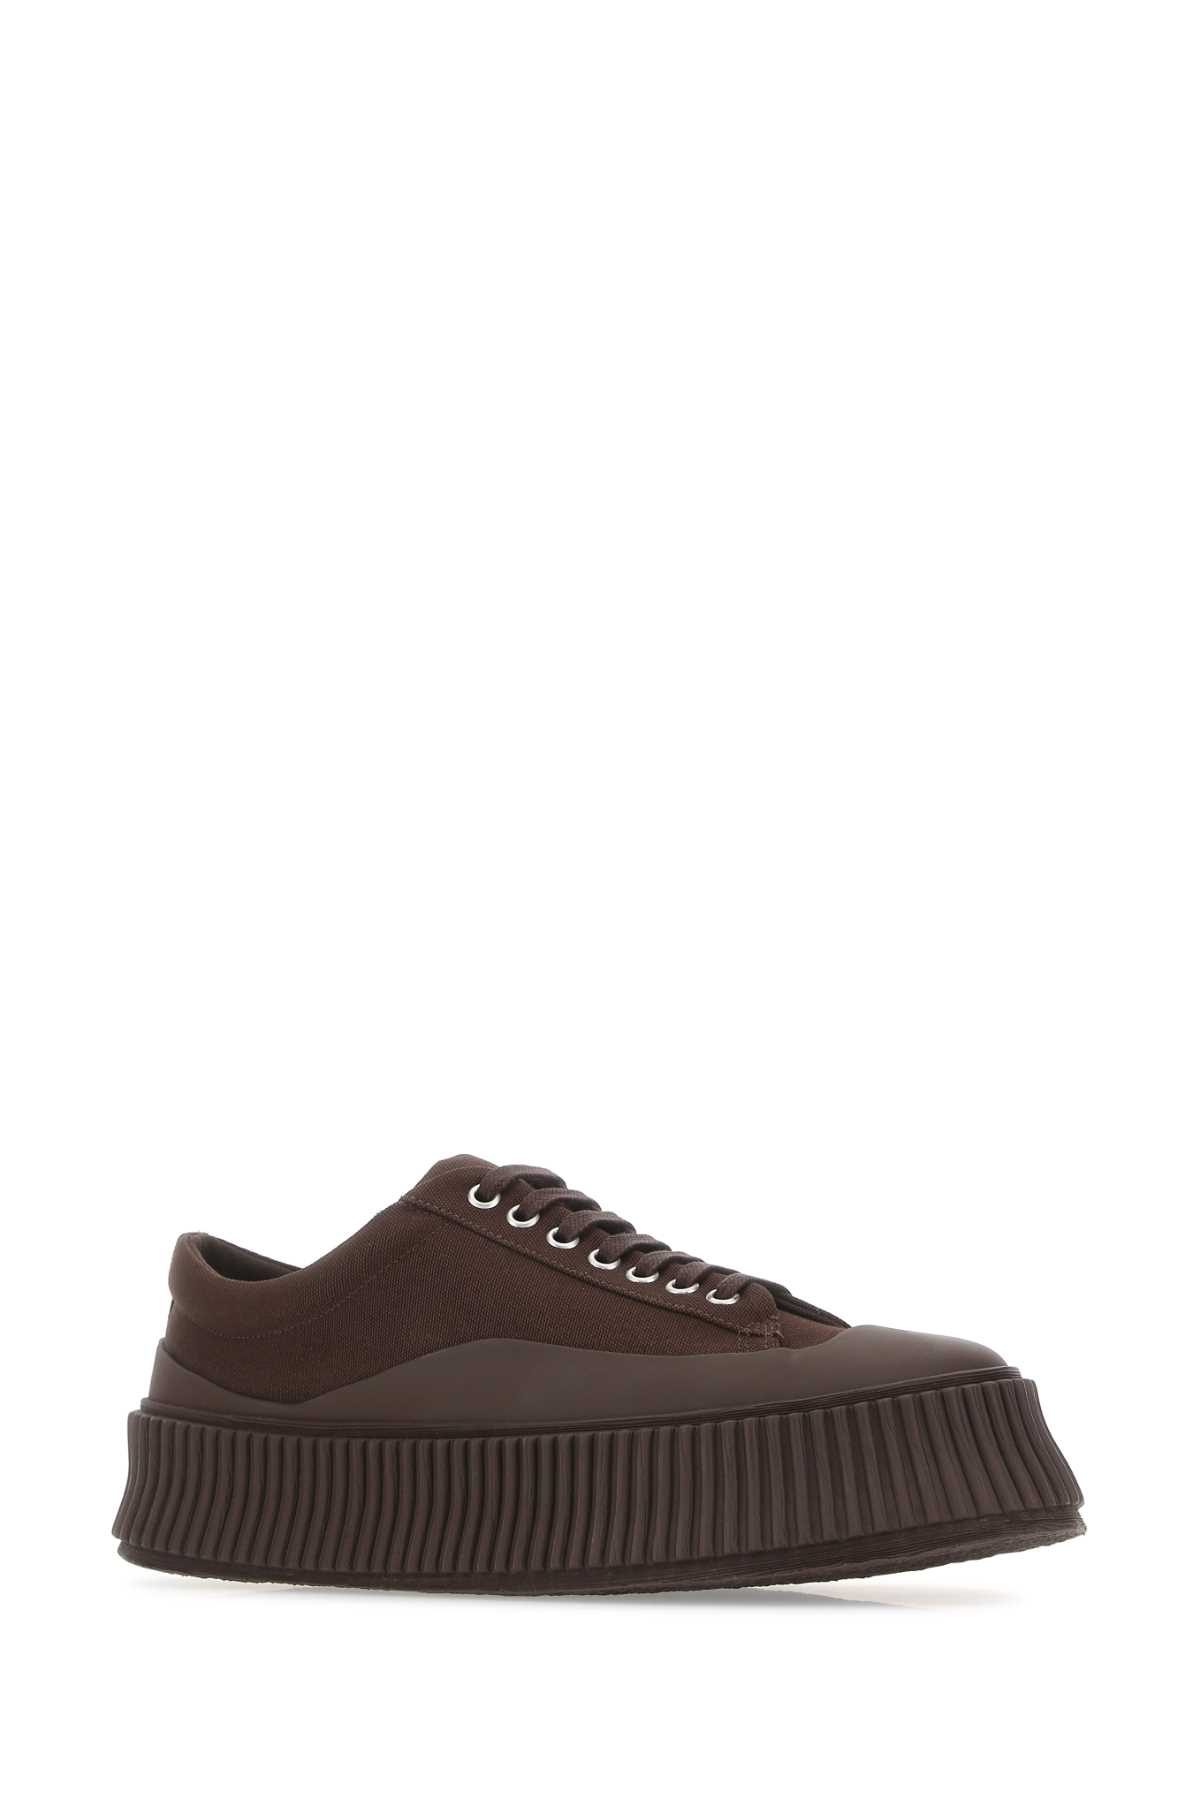 Jil Sander Brown Canvas And Rubber Trainers In 209